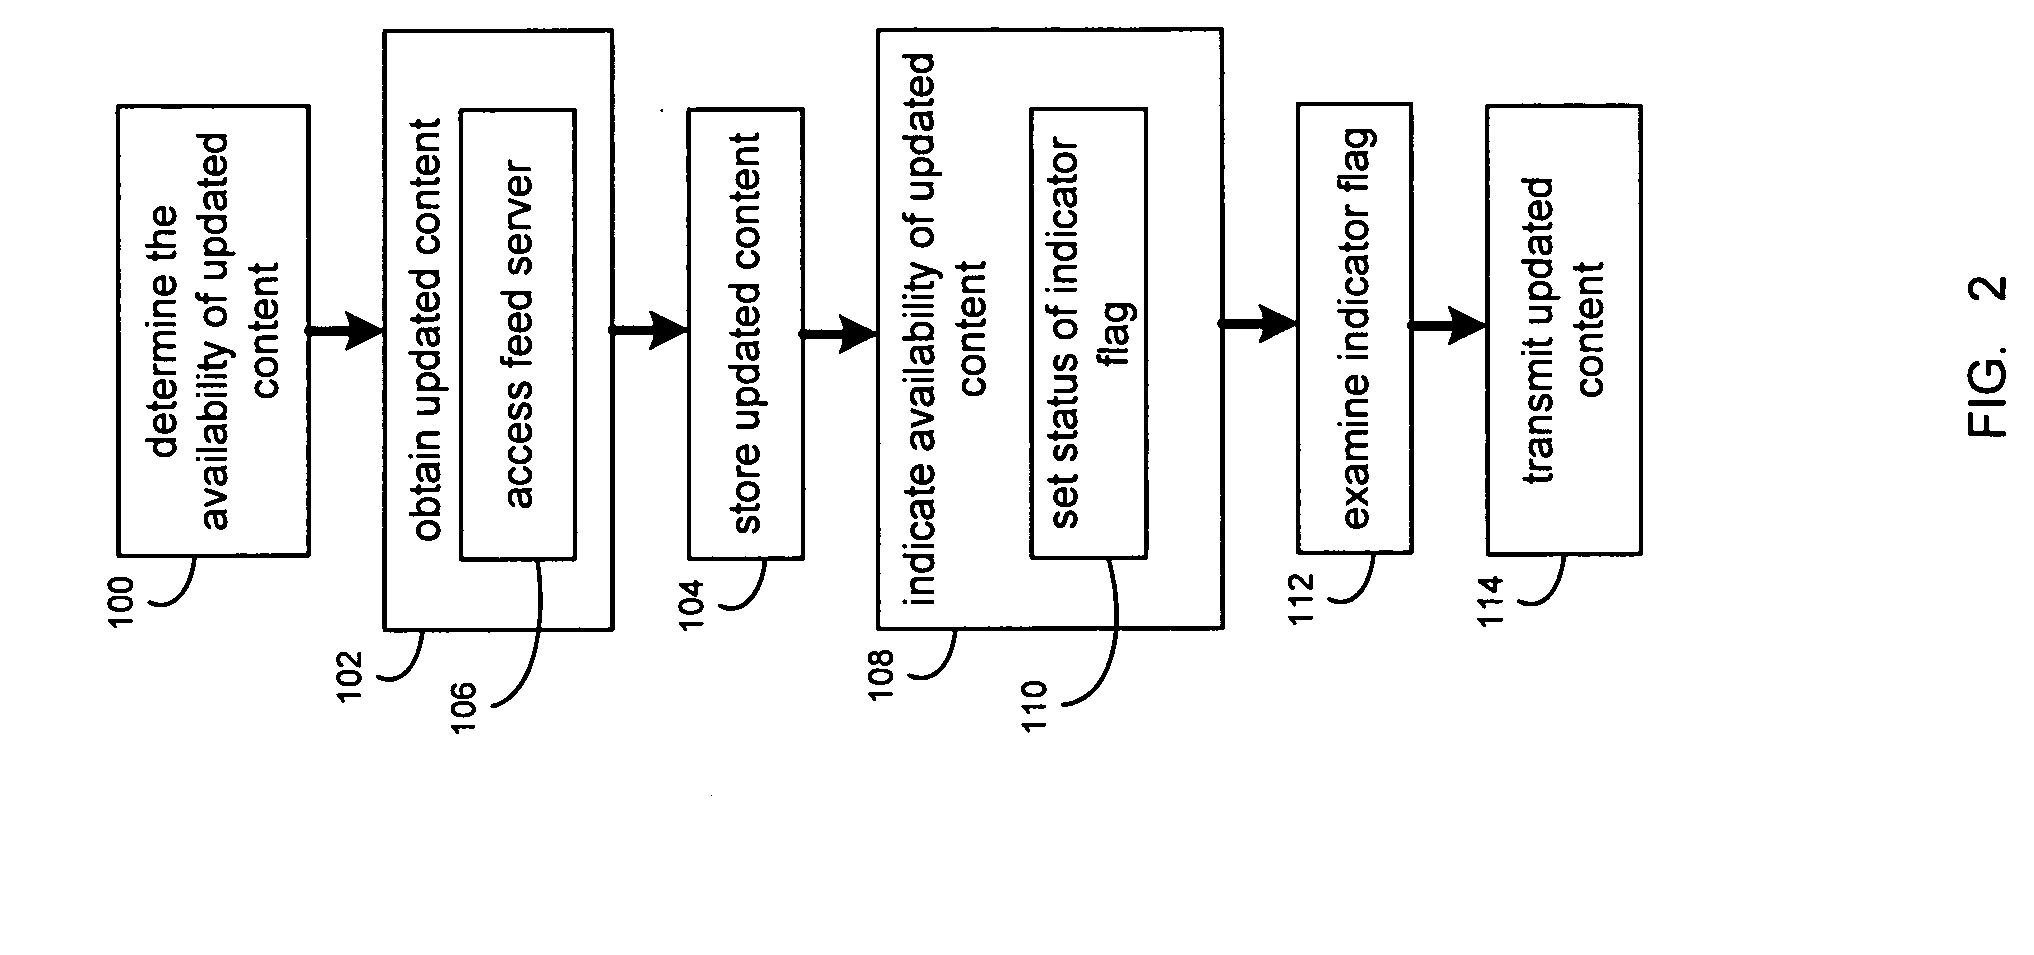 System and method for automatically obtaining web feed content